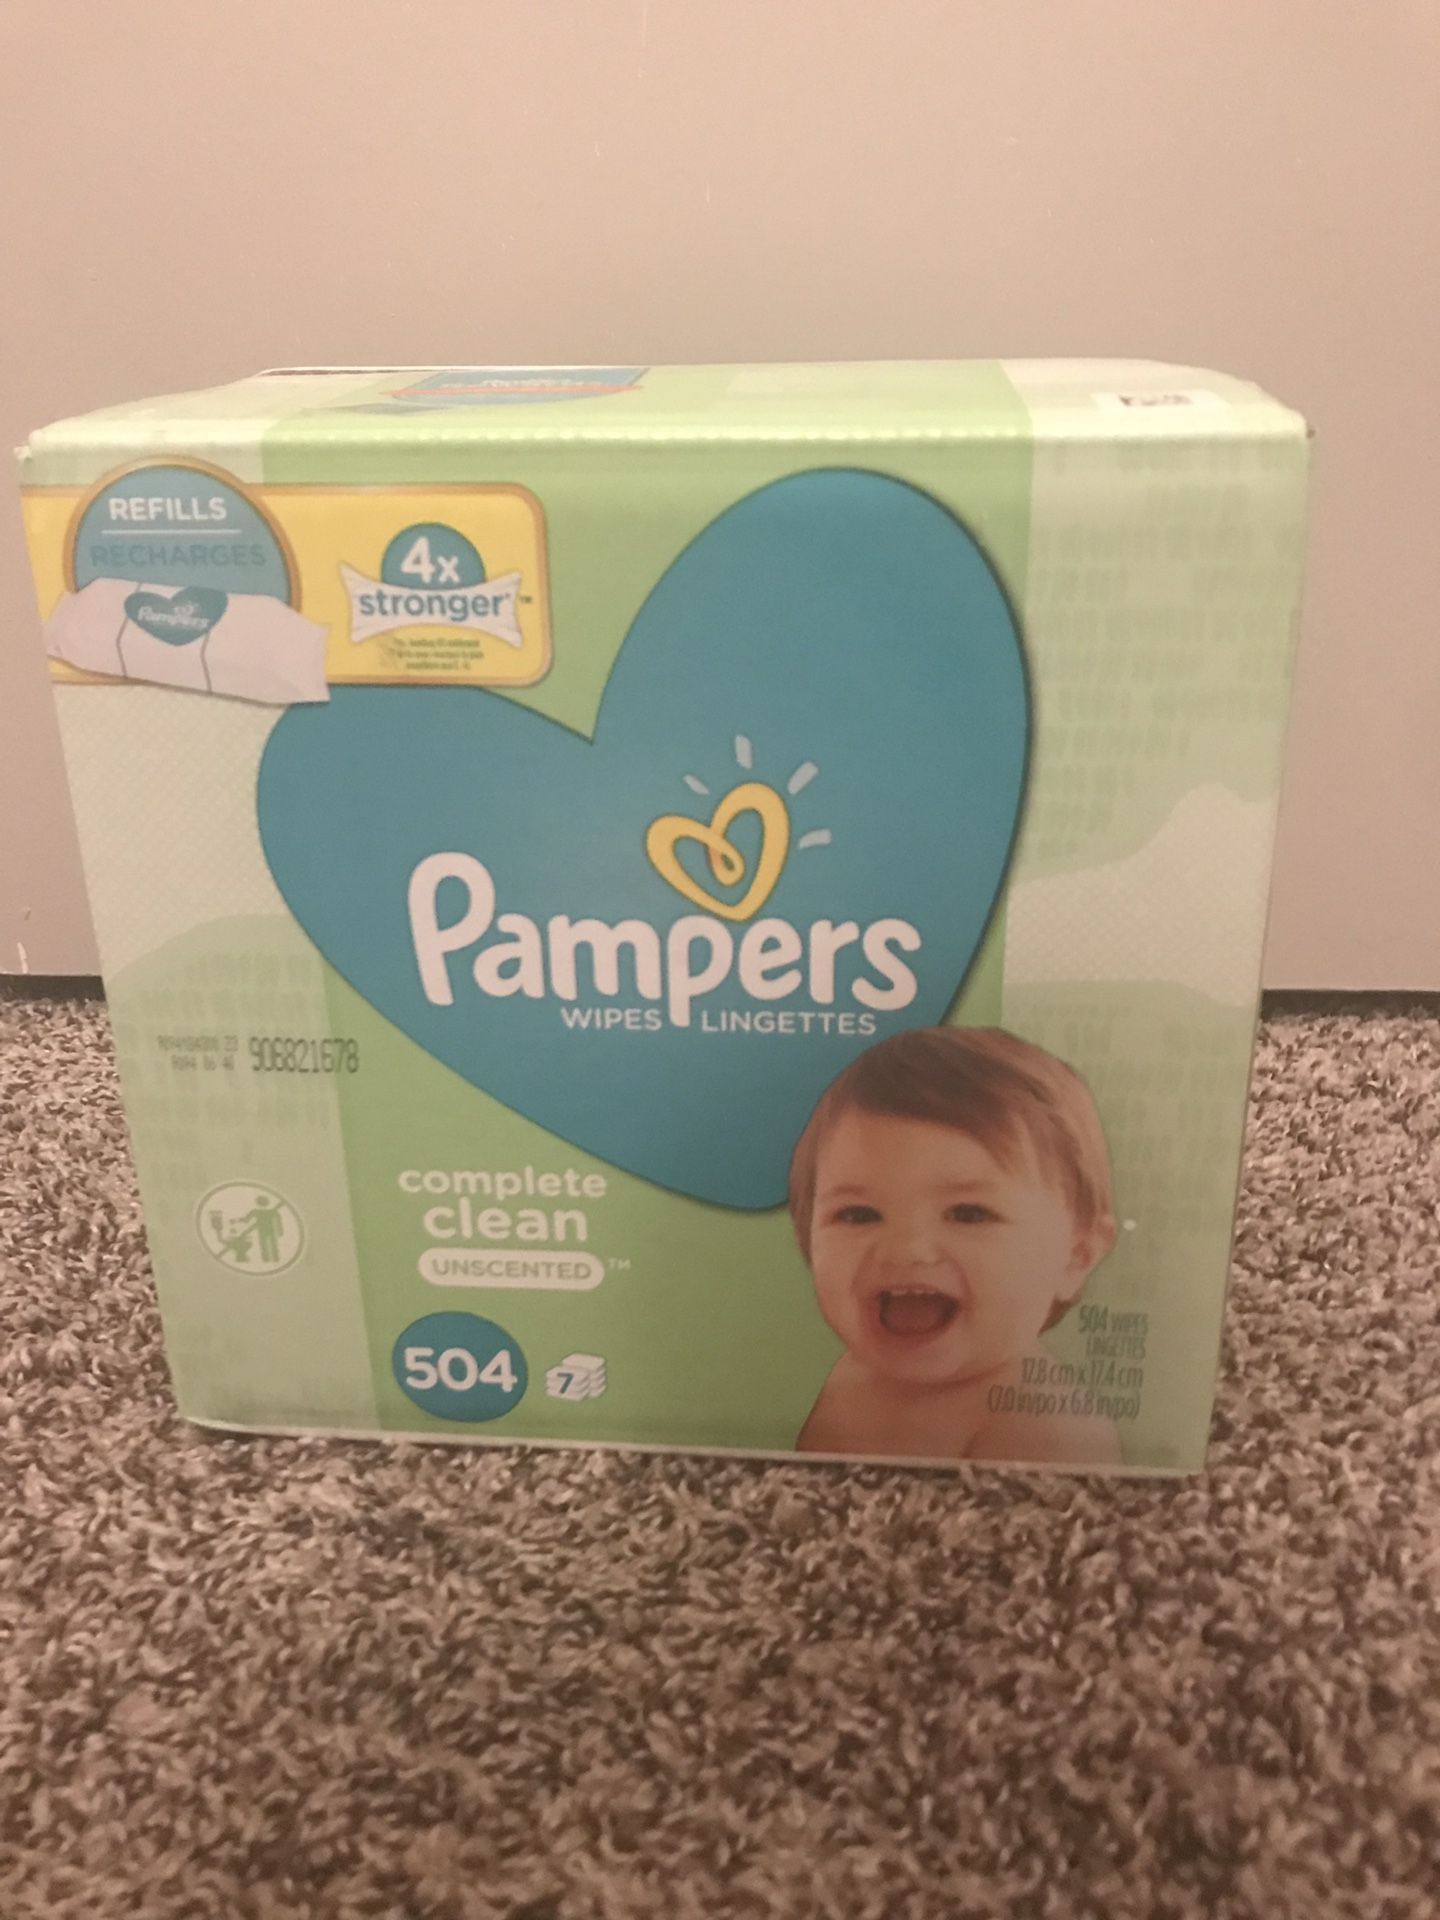 Pampers Refill Wipes 504ct